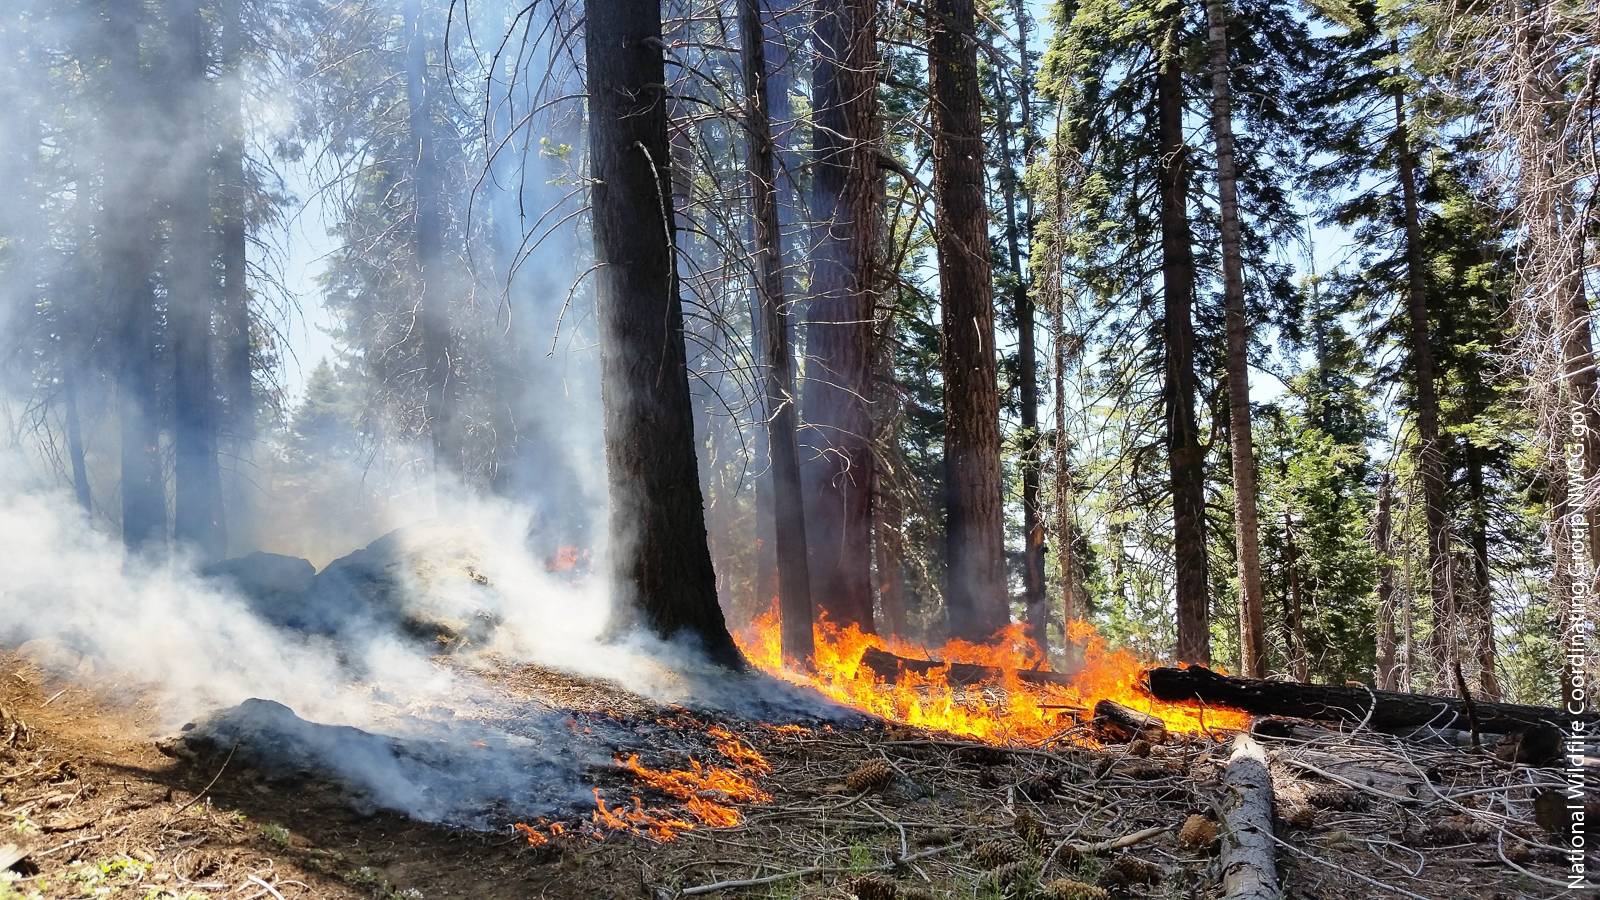 A prescribed burn moves slowly through a forest in Sequoia National Park in June 2015. The burn is intended to help restore the area to more natural conditions by promoting sustainable tree growth and habitat for plants and animals while reducing tree density and ladder fuels.